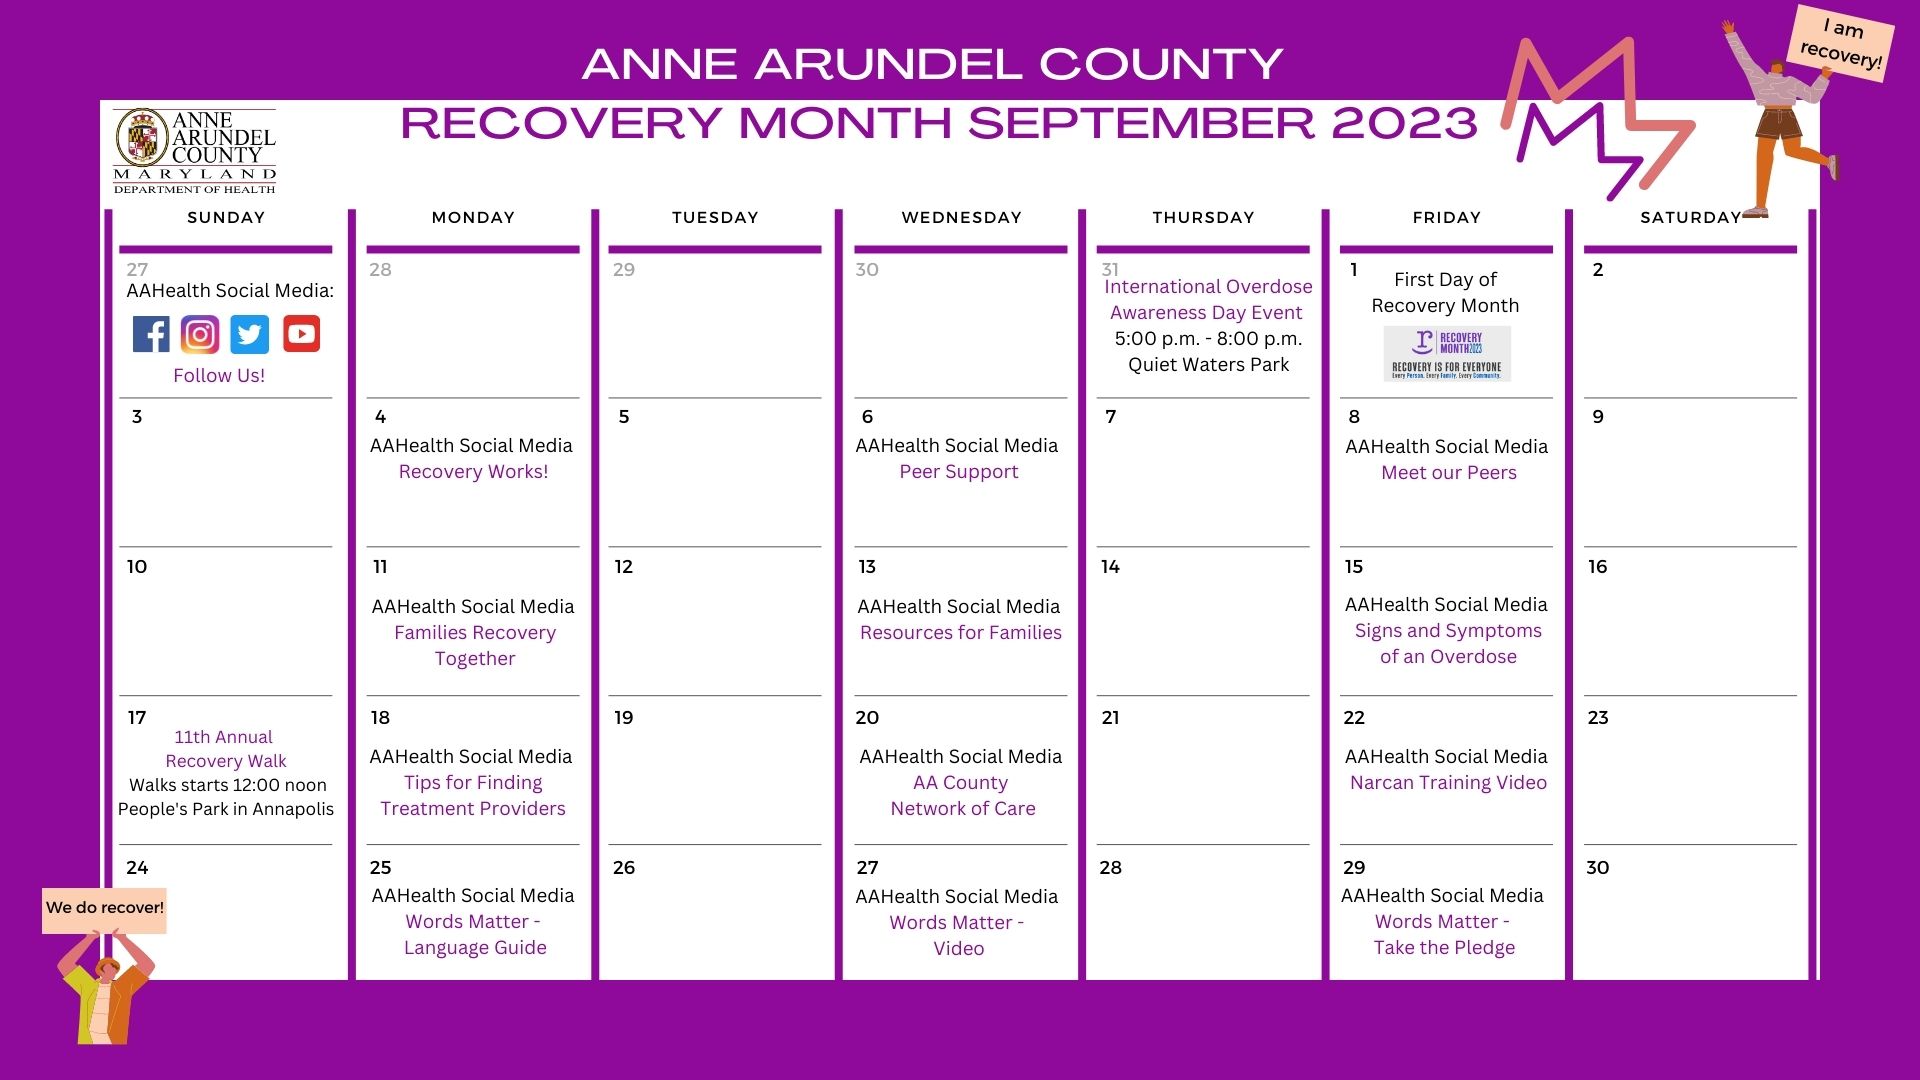 Anne Arundel County Recovery Month September 2023 Calendar of Events